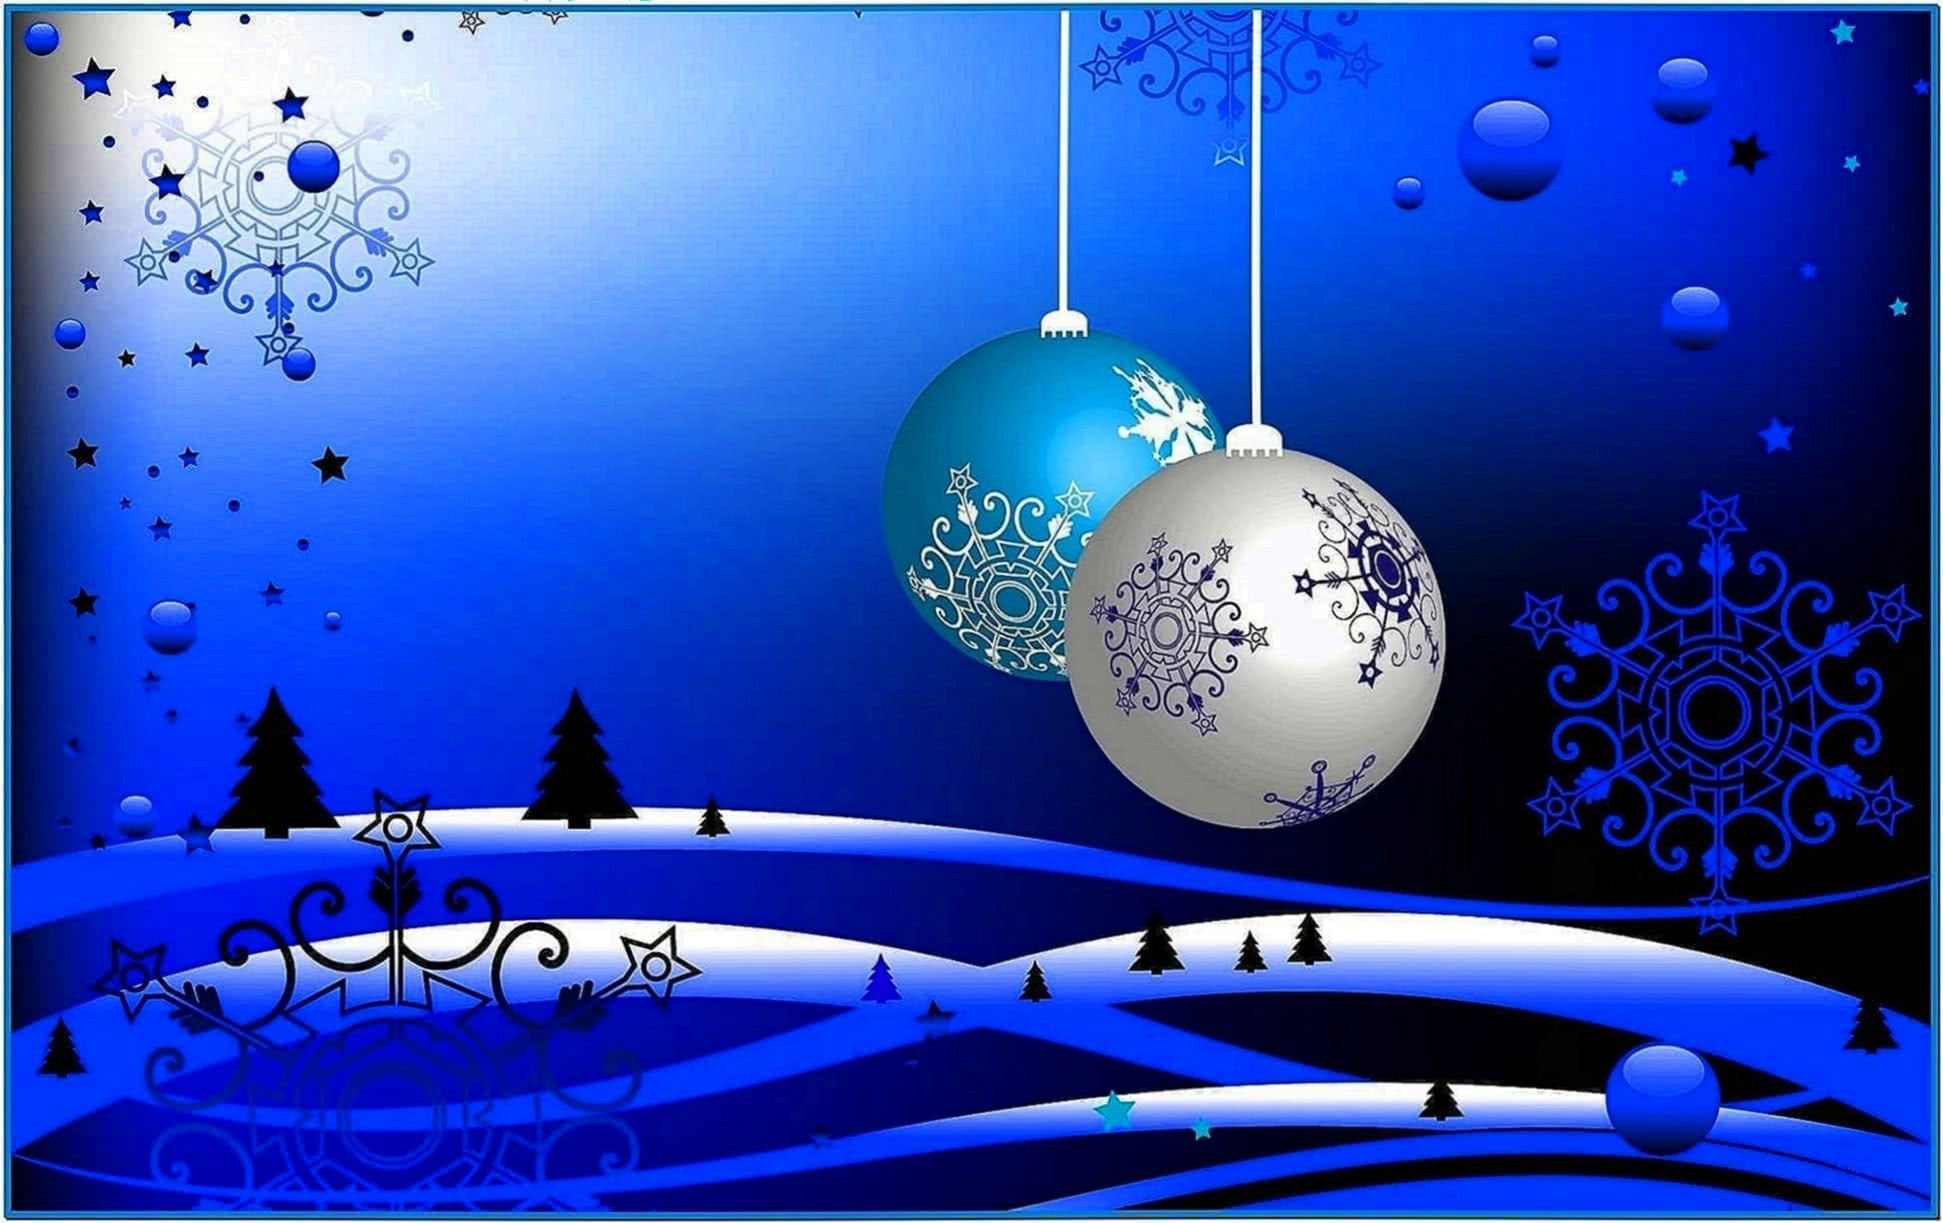 Download Free Holiday Screensavers And Wallpaper Gallery